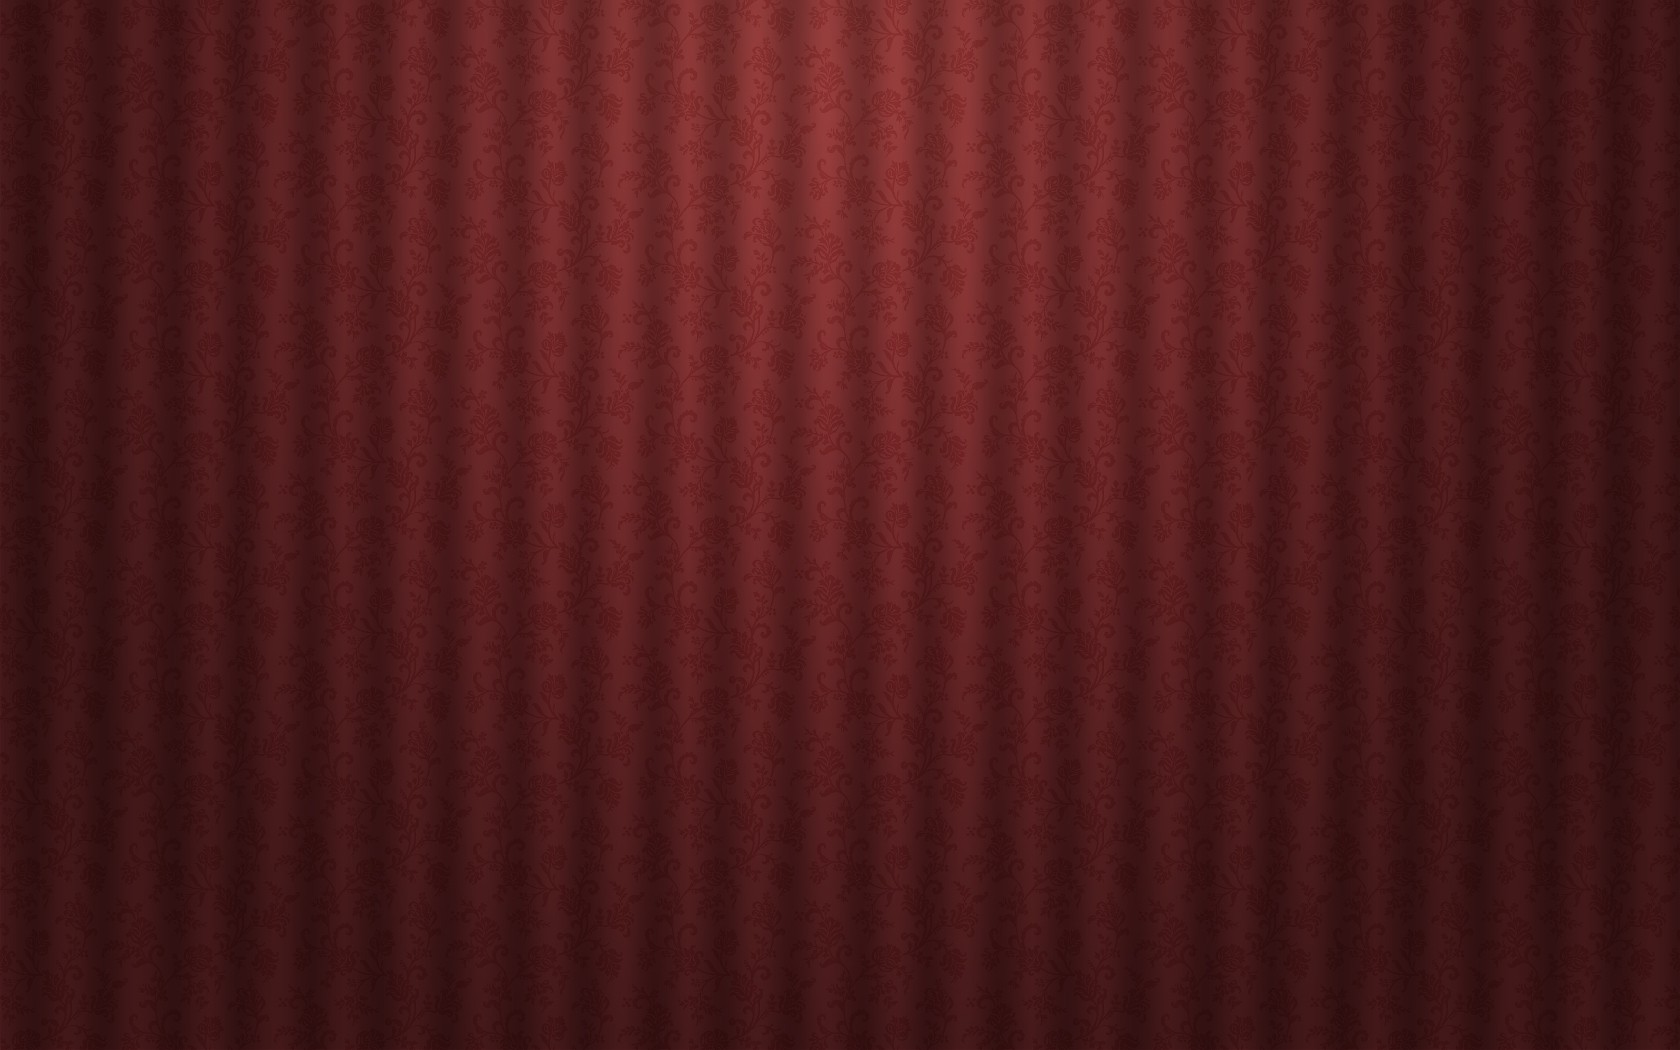 Red Textures Curtains Floral Wallpaper Background